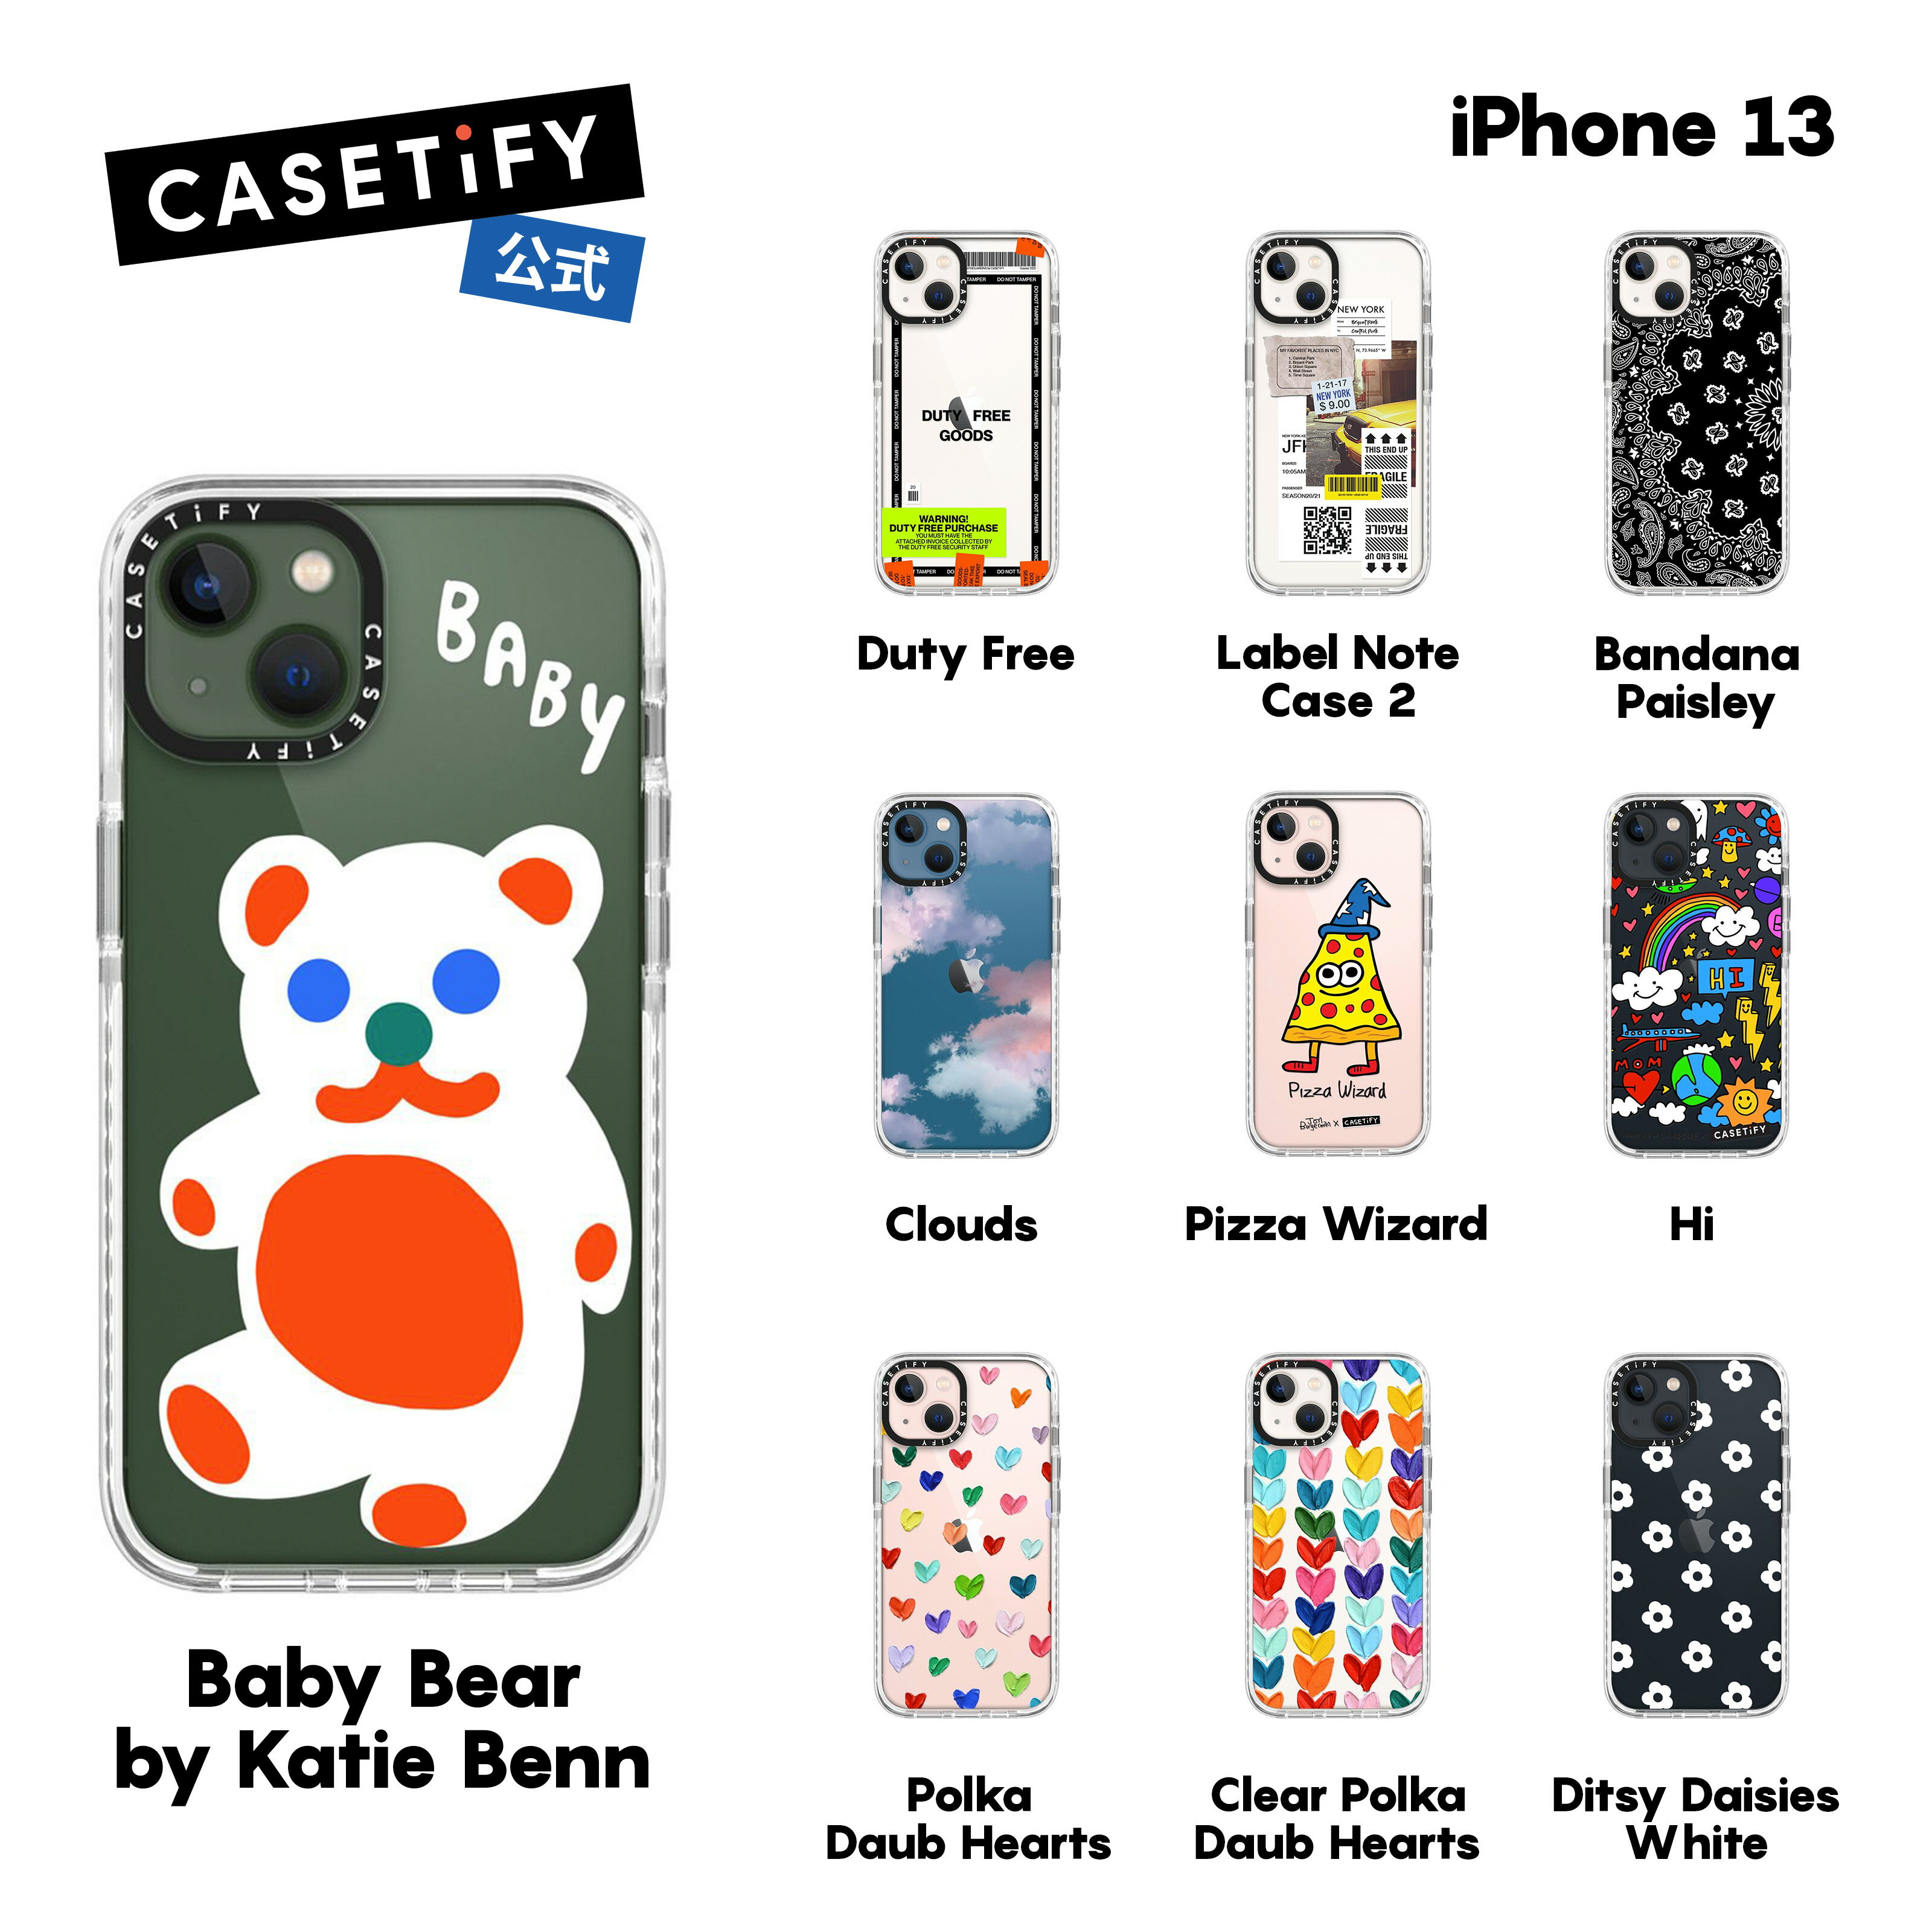 CASETiFY iPhone13 インパクトケース クリア ブラック クリア フロスト Duty Free Pizza Wizard Clouds Baby Bear by Katie Benn iPhoneケース iPhone13 耐衝撃 保護ケース 透明